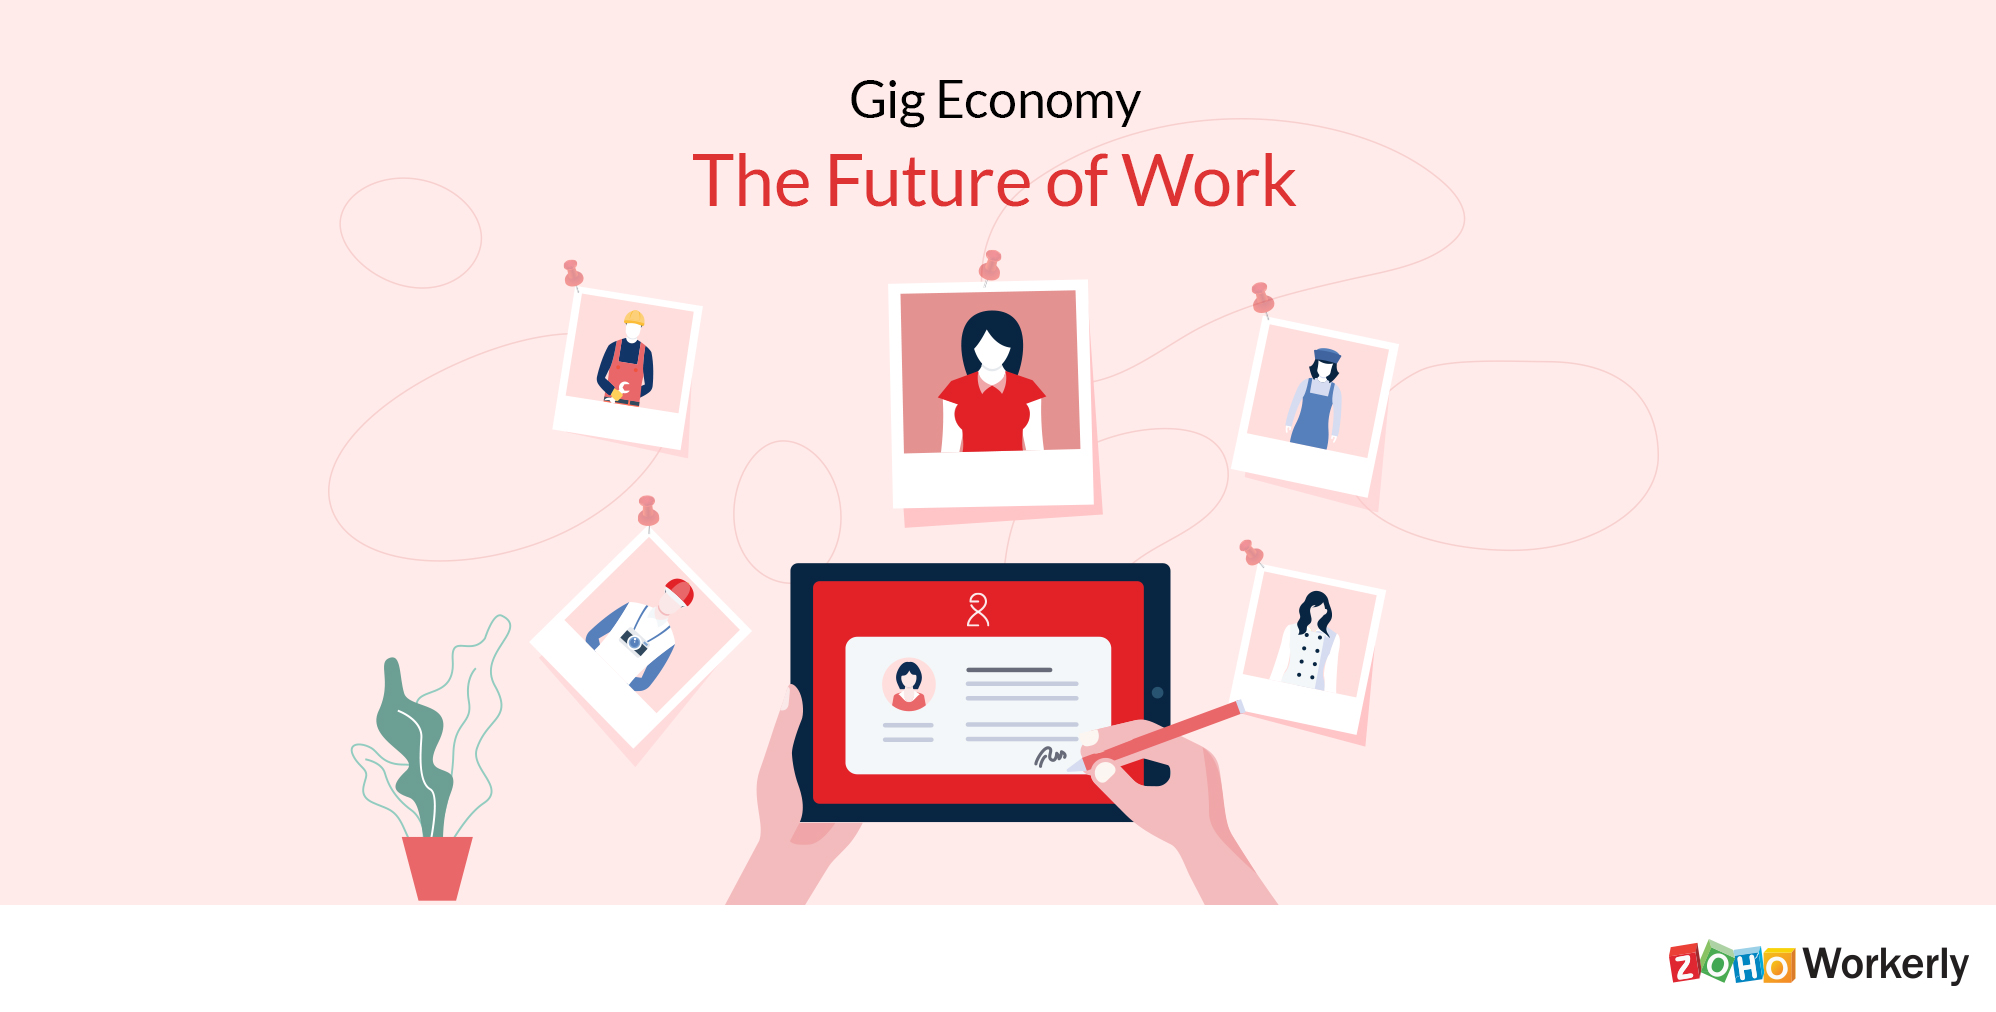 The right tool for tackling the gig economy.